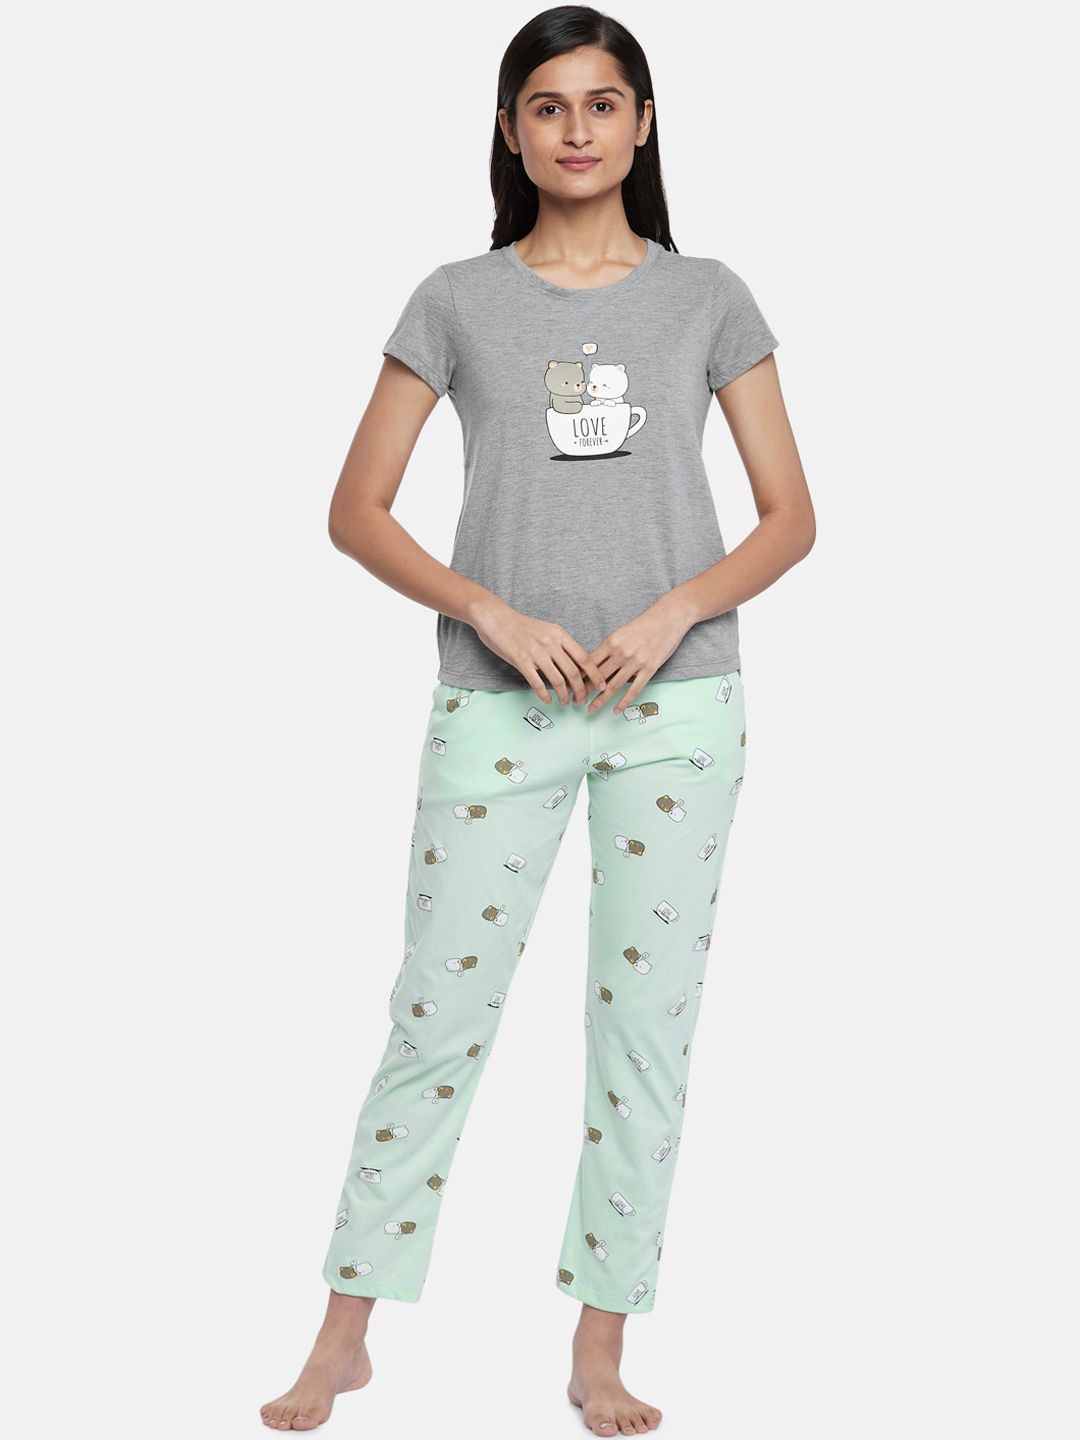 Dreamz by Pantaloons Women Grey & Green Printed Pure Cotton Night suit Price in India